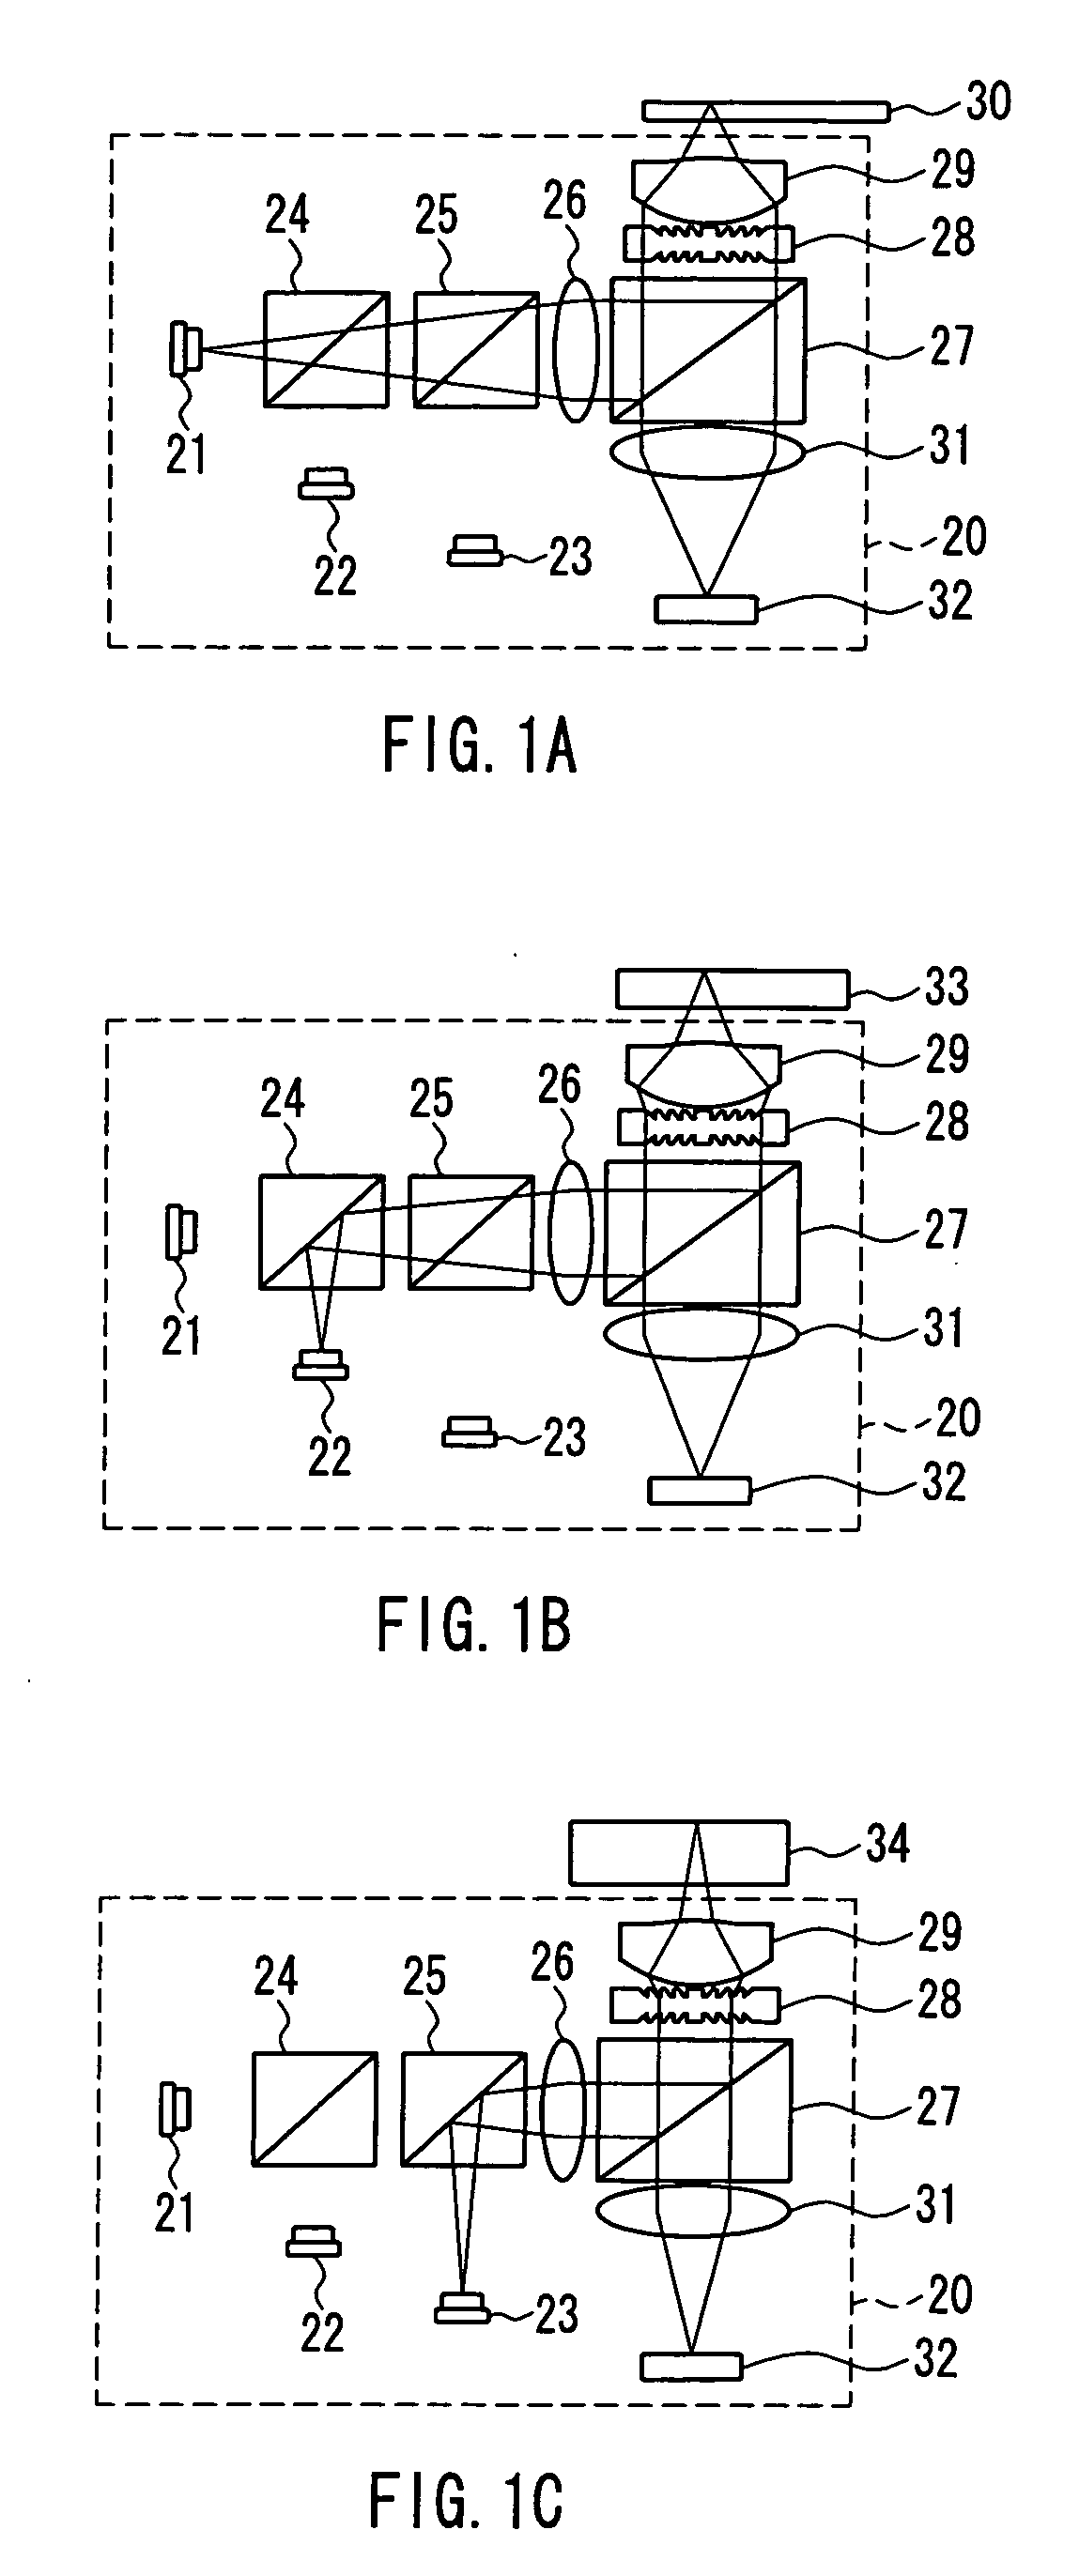 Optical element, optical head, optical information recording/reproduction device, computer, video recording device, video reproduction device, server, and car navigation system